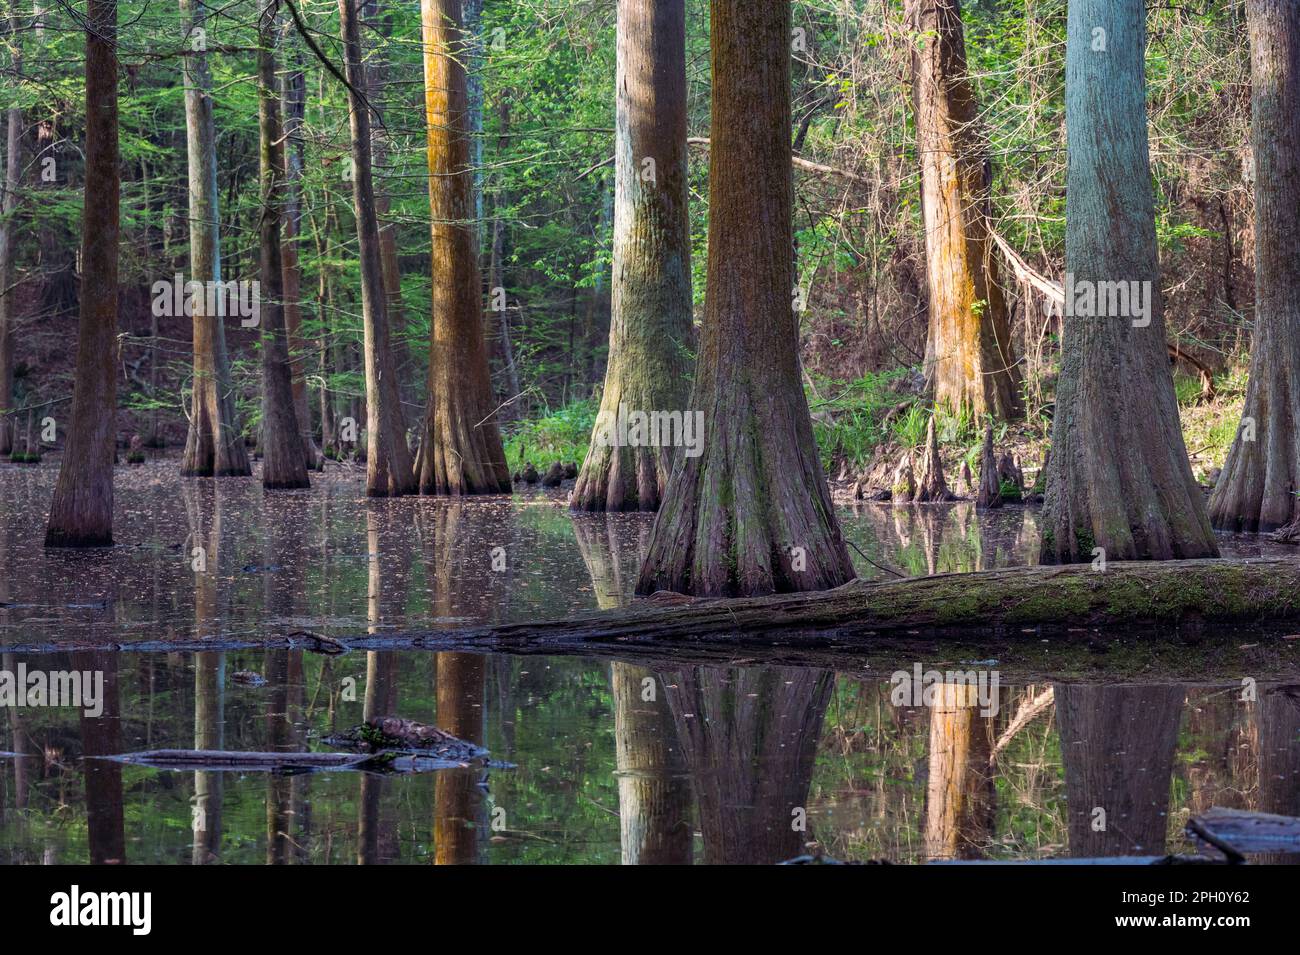 Bald cypress trees, Taxodium distichum, leafing out in springtime, their trunks reflected in the water. Stock Photo